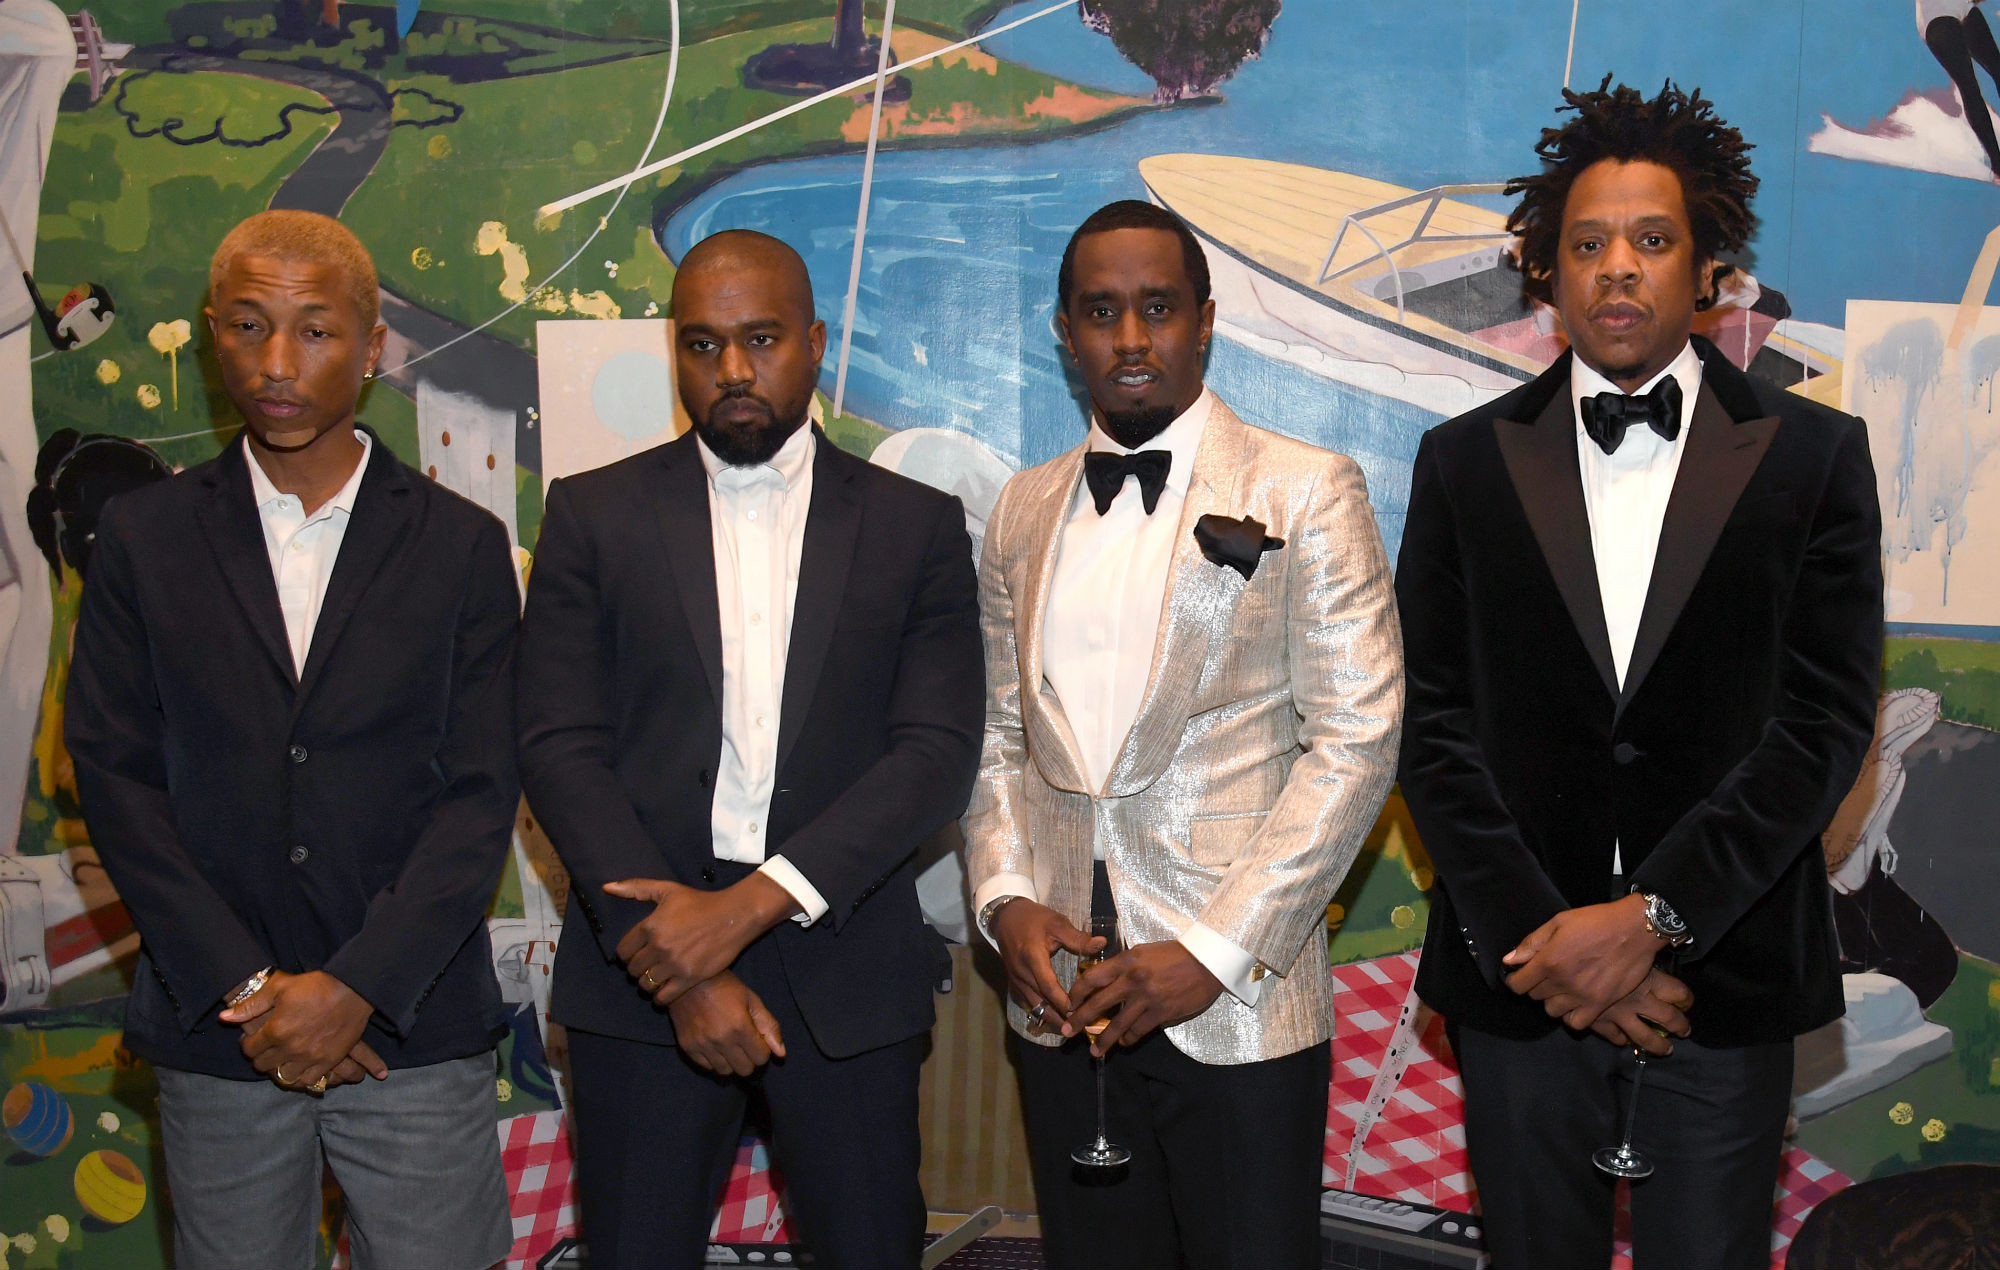 Diddy Birthday Party
 Diddy shows off extravagant 50th birthday party in new video